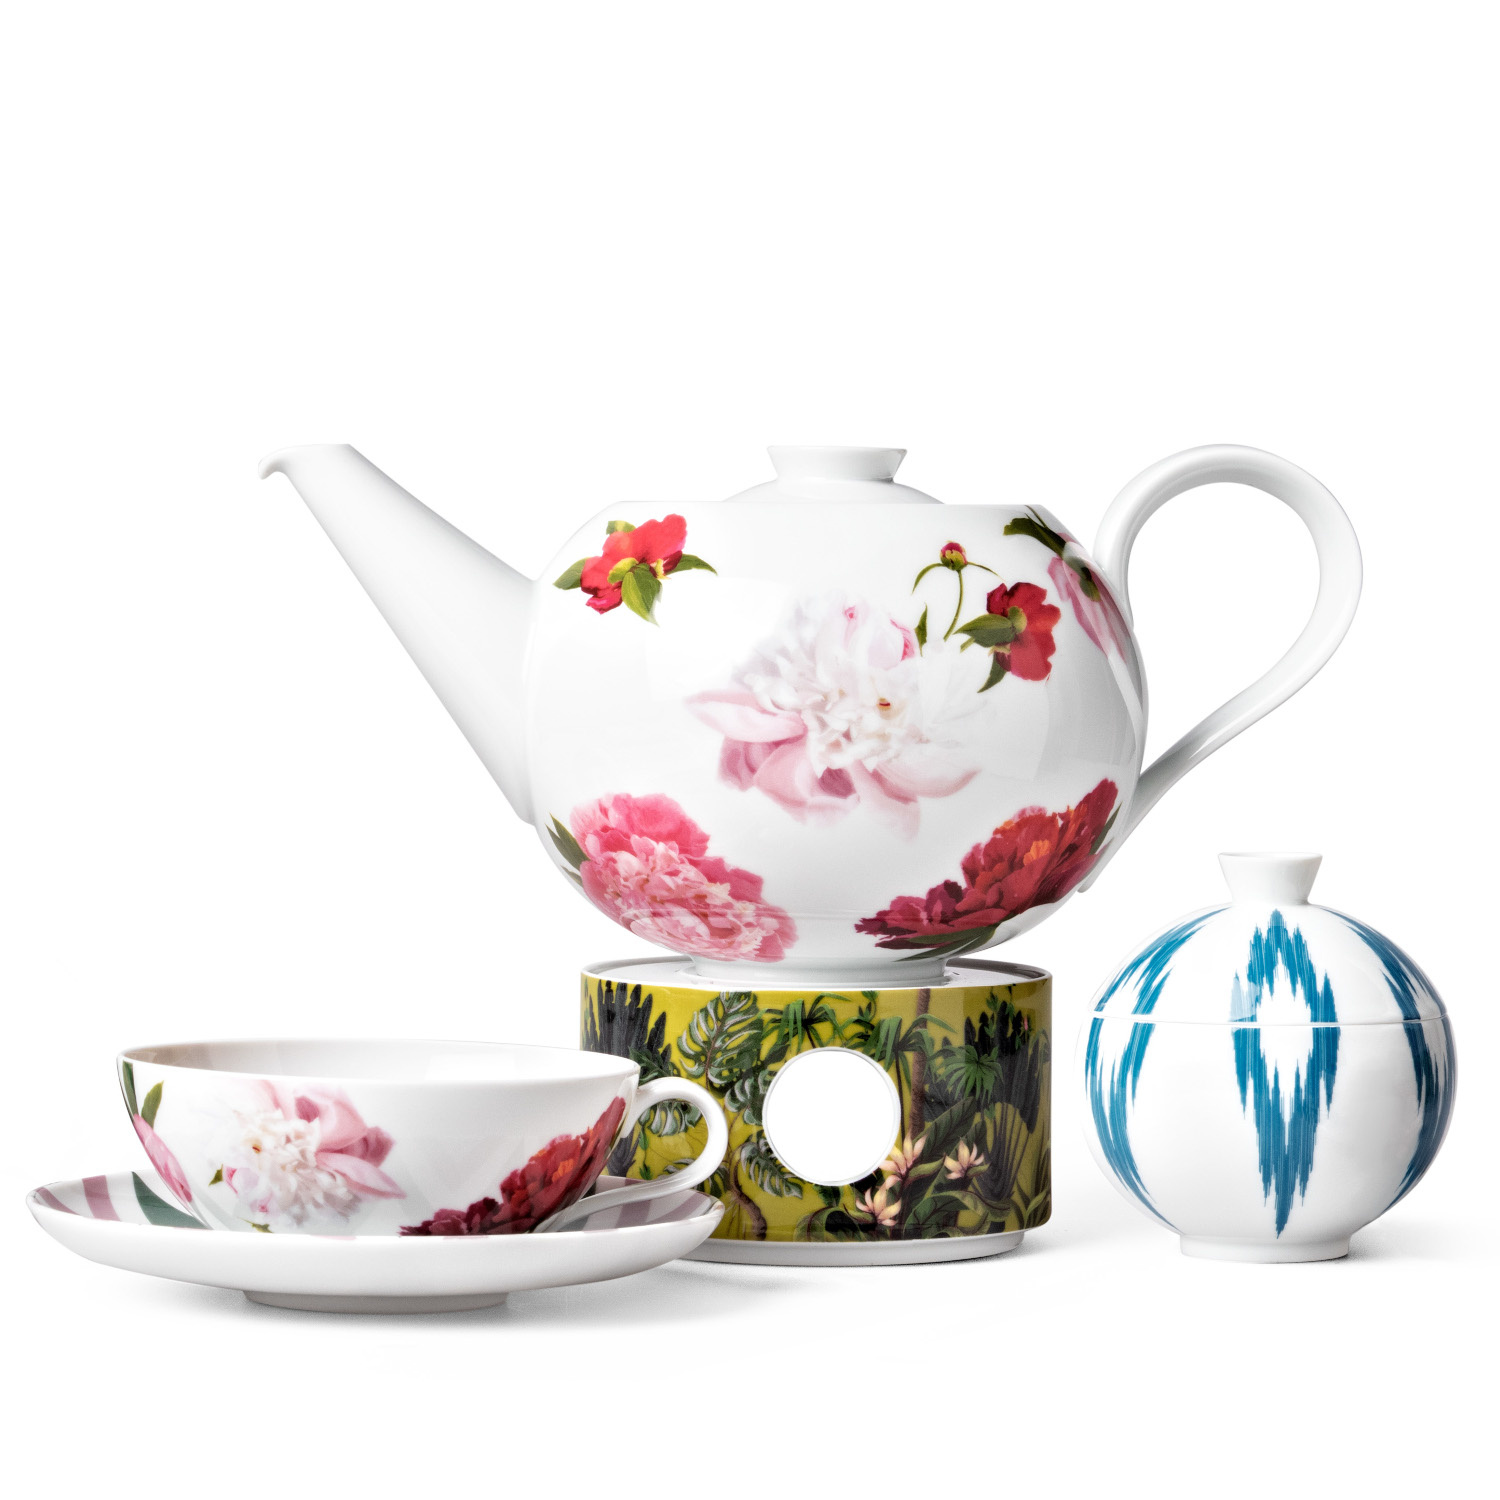 Tea Bowl Sieger by Furstenberg Collezione My China! Paraiso